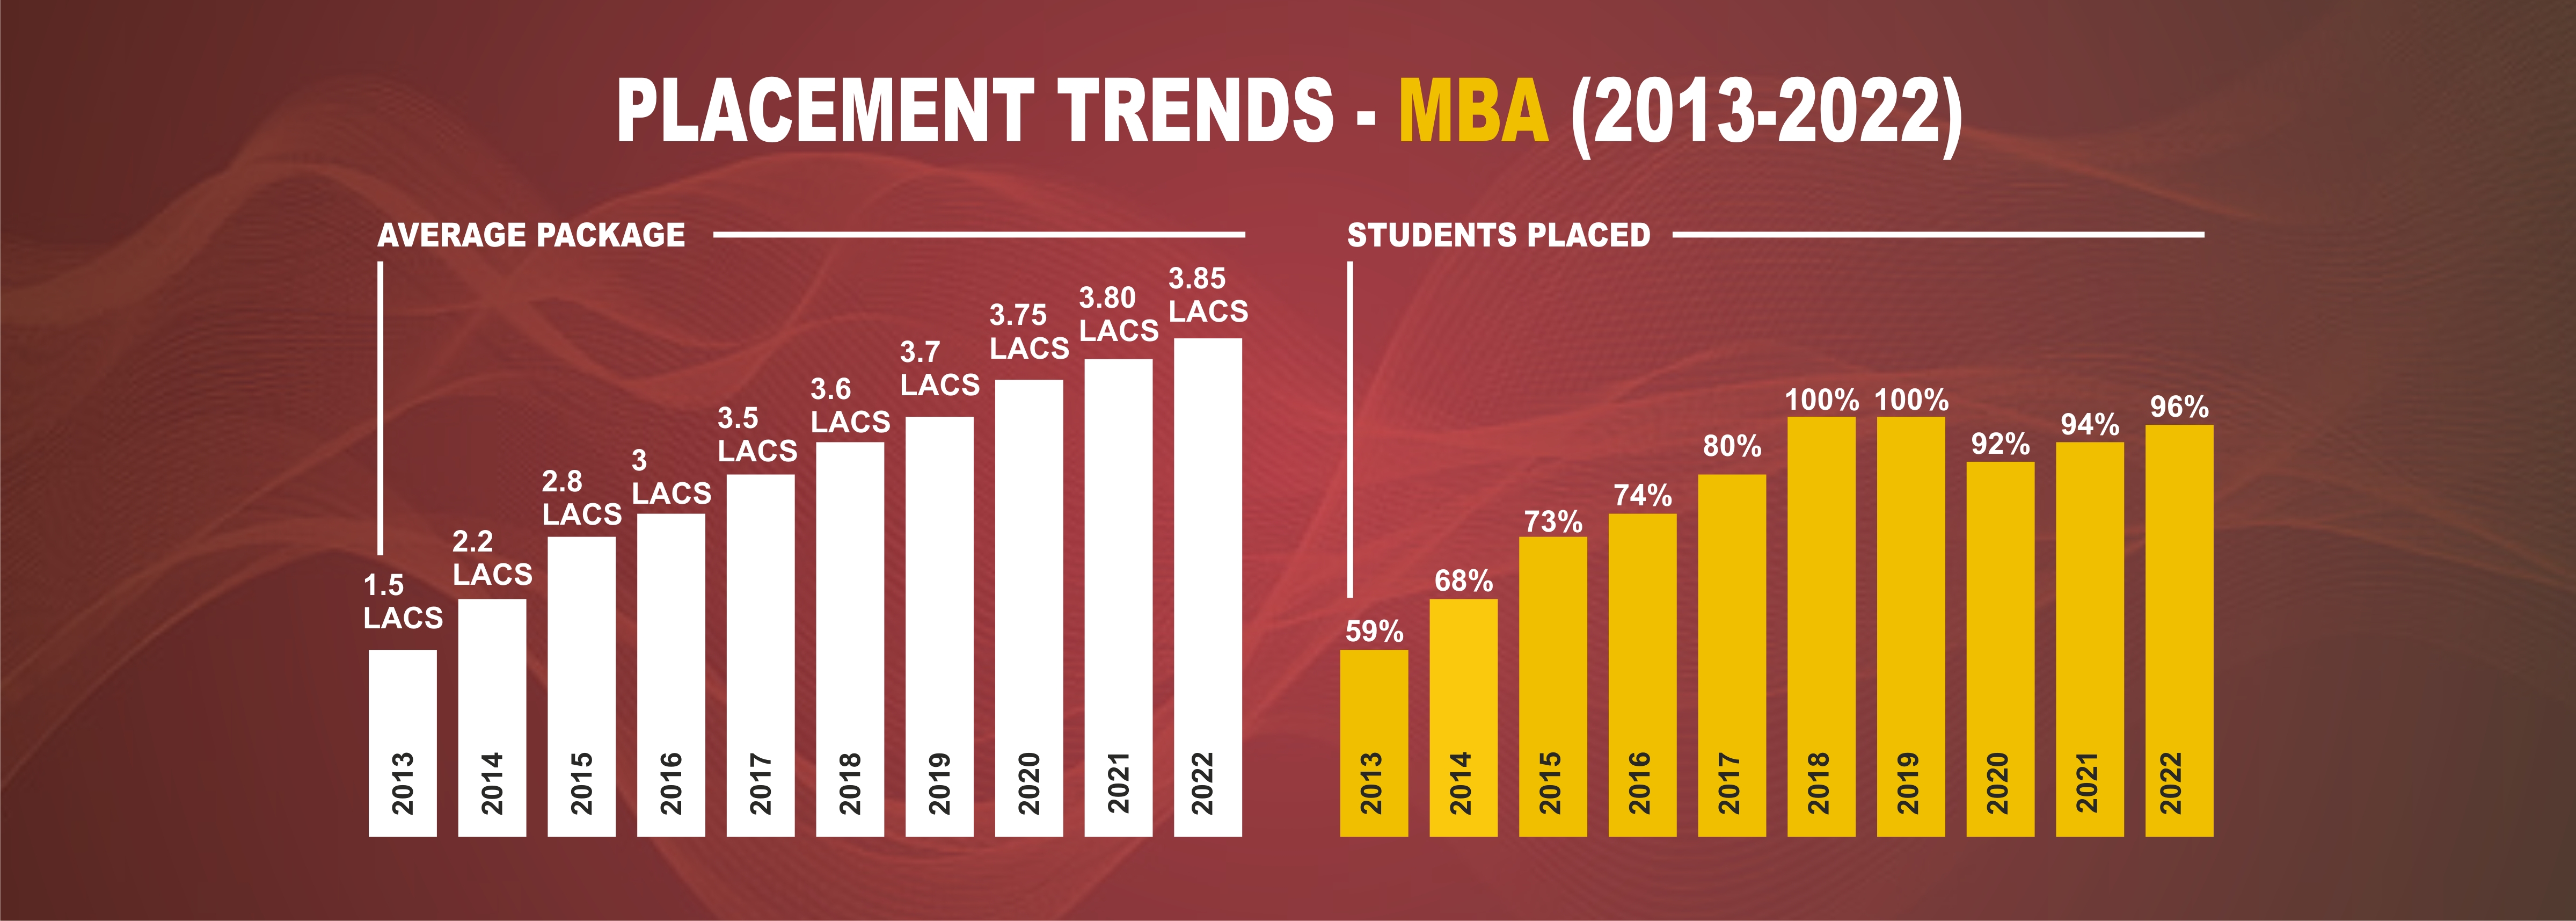 PLACEMENT-TRENDS-MBA-2013-2022